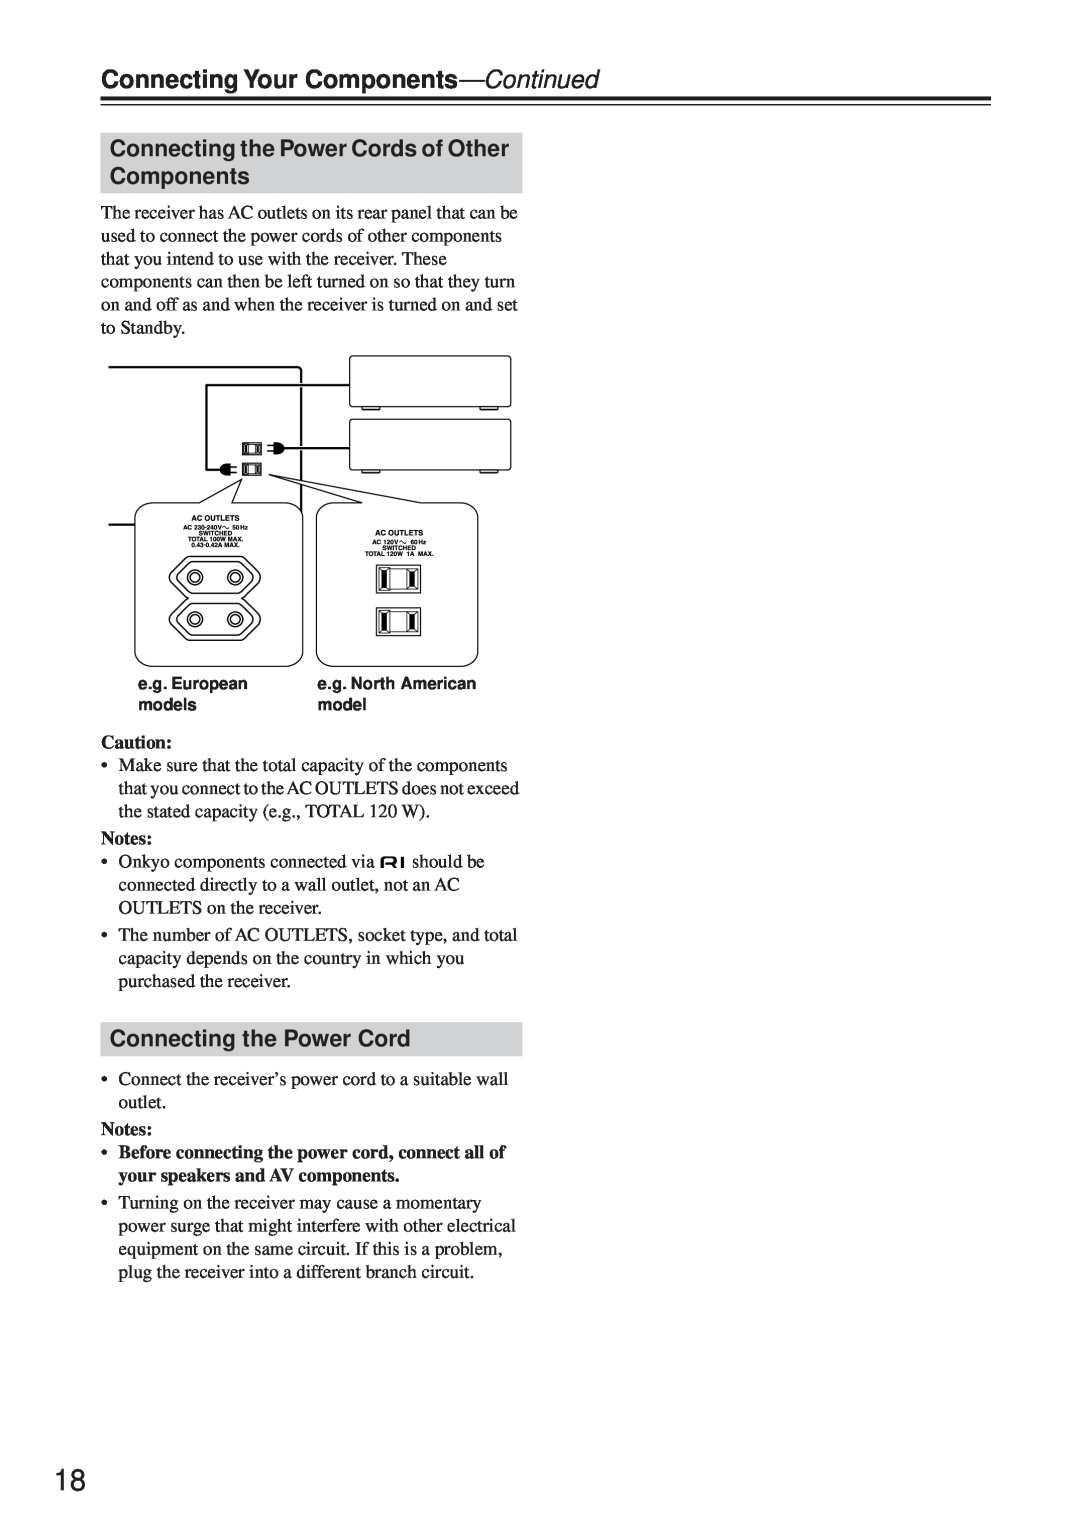 Onkyo TX-8255 instruction manual Connecting the Power Cords of Other Components, Connecting Your Components-Continued 